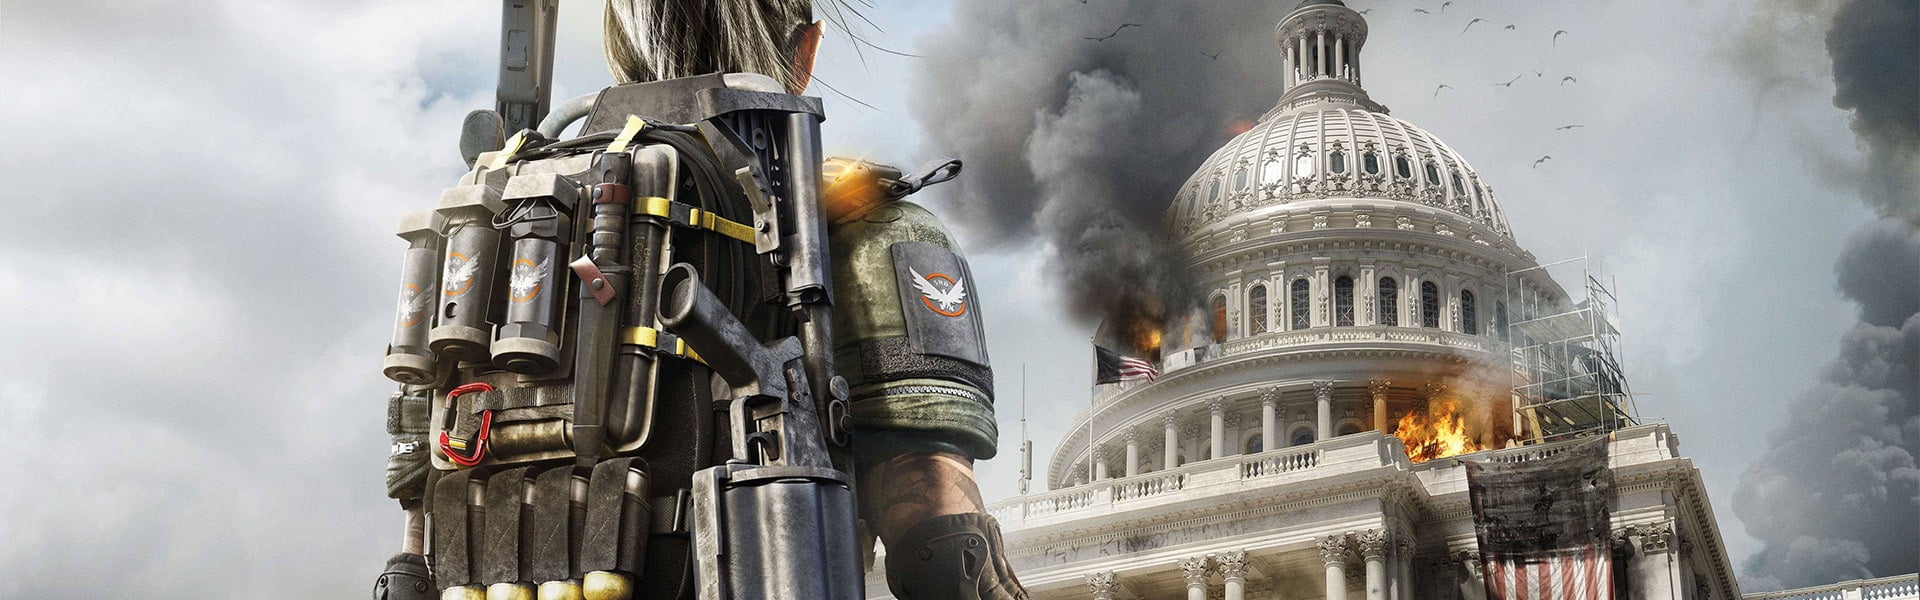 Tom Clancy's The Division 2 Review 12